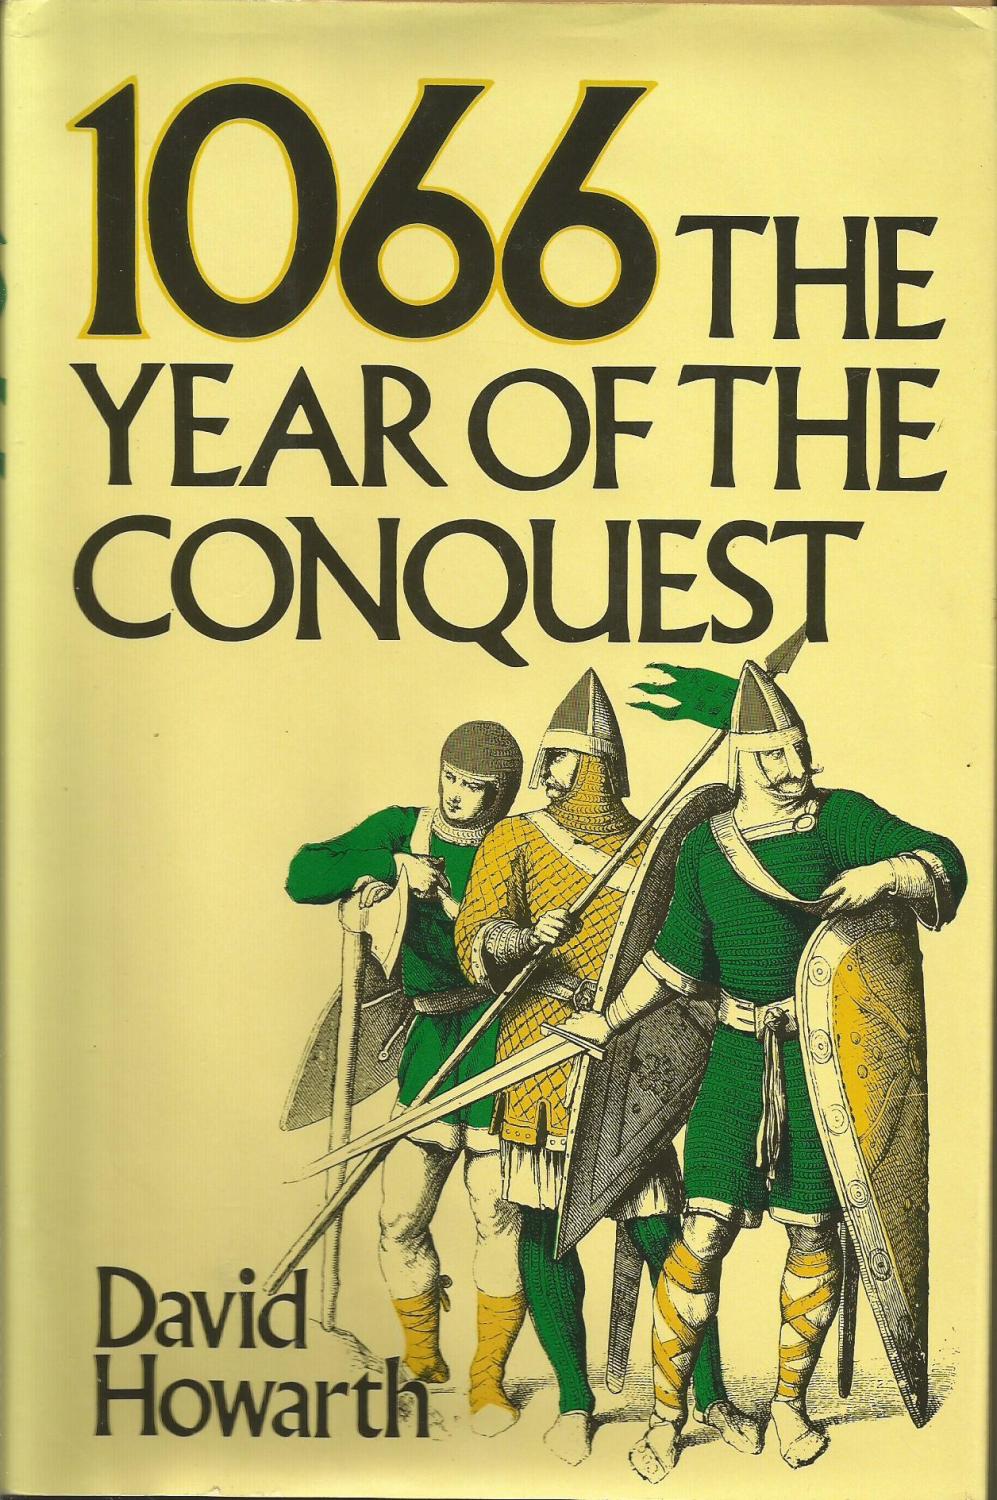 1066: The Year of the Conquest - Howarth, David